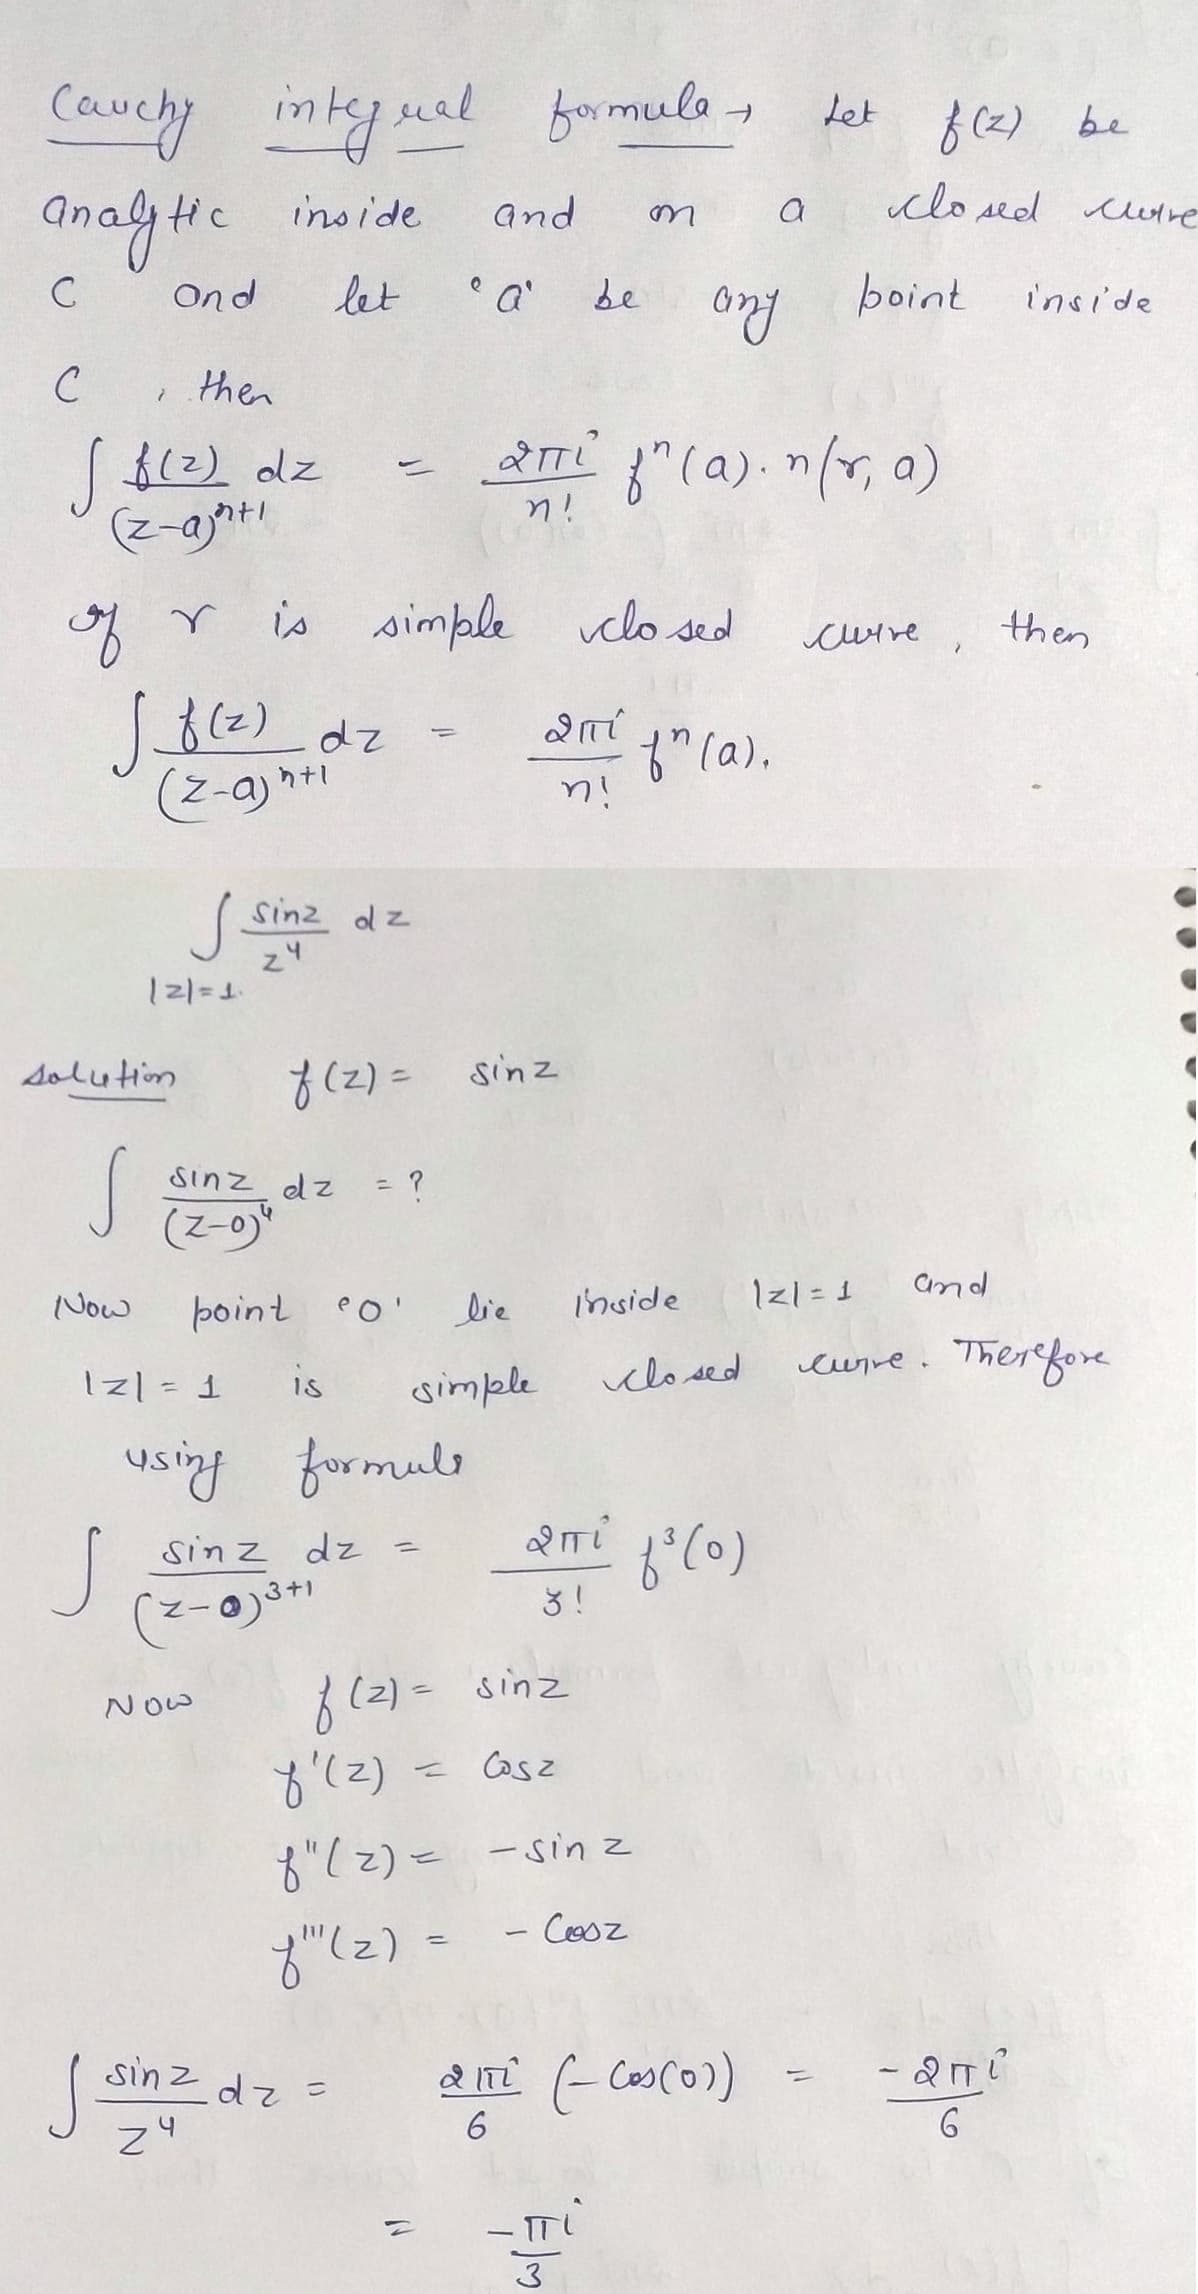 Cauchy integral formule, det
analythe inside
C
Ond
let
с
then
√ $(2) dz
(z-ajat!
7
of r
Now
√ _f (²) dz
(z-a)htl
S
solution
|2|=1₁
على
r is simple closed
1z| = 1
Sinz dz
24
Sinz dz = ?
(2-0)
Now
point o'
is
f(z) = sinz
using formule
sin z dz
(2-0)3+1
and
e
"a'
lie
simple
=
sinz dz=
zu
2πTi
n!
be
f(2)= sinz
= Cosz
2 mi
n!
-
2πi
m
f'(z)
f"(z) = - sinz
f"(z)
Cosz
Elm
inside
any
f" (a). n (r, a)
f" (a).
closed
a
f³(0)
2 171 (- Cos (01)
6
Let f (2) be
closed wire
point
|z1 = 1
cuire
>
and
inside
then
curve. Therefore
- 2πi
6
C
C